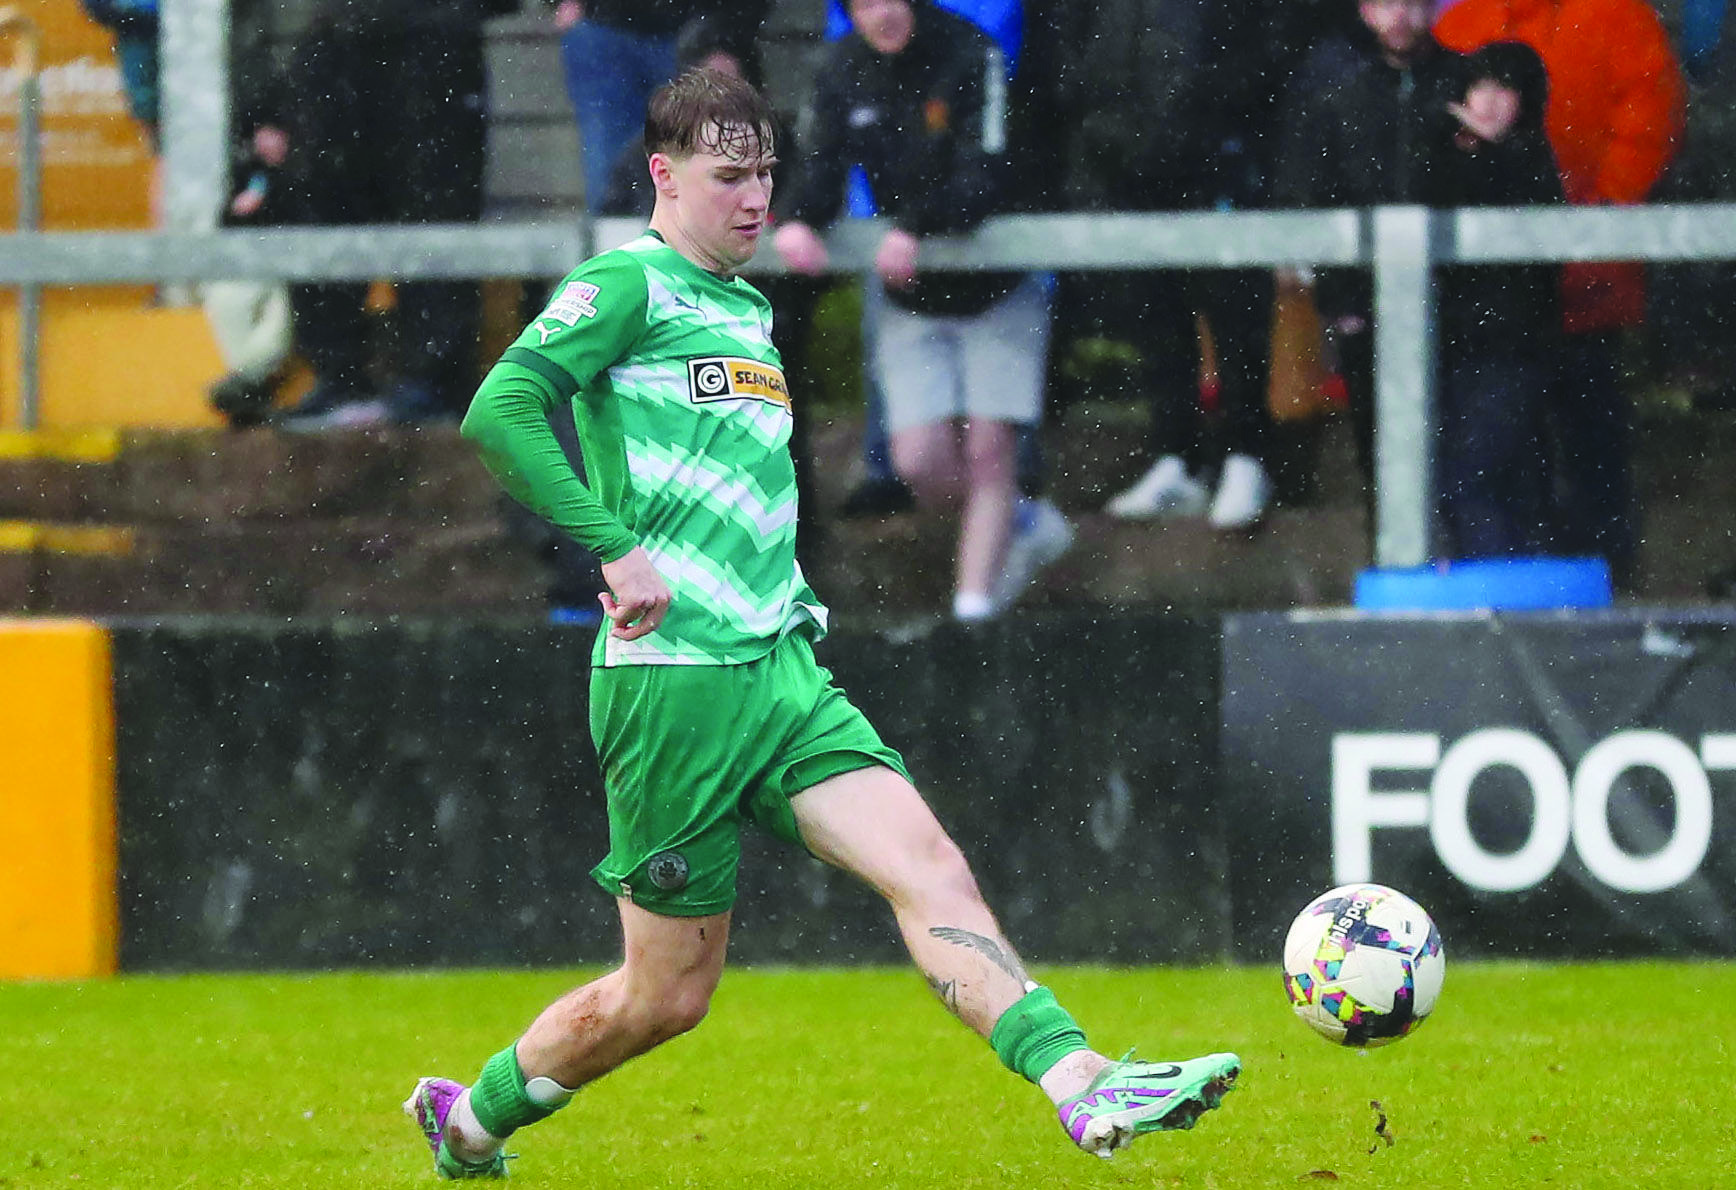 Stephen Mallon has impressed since his return from injury